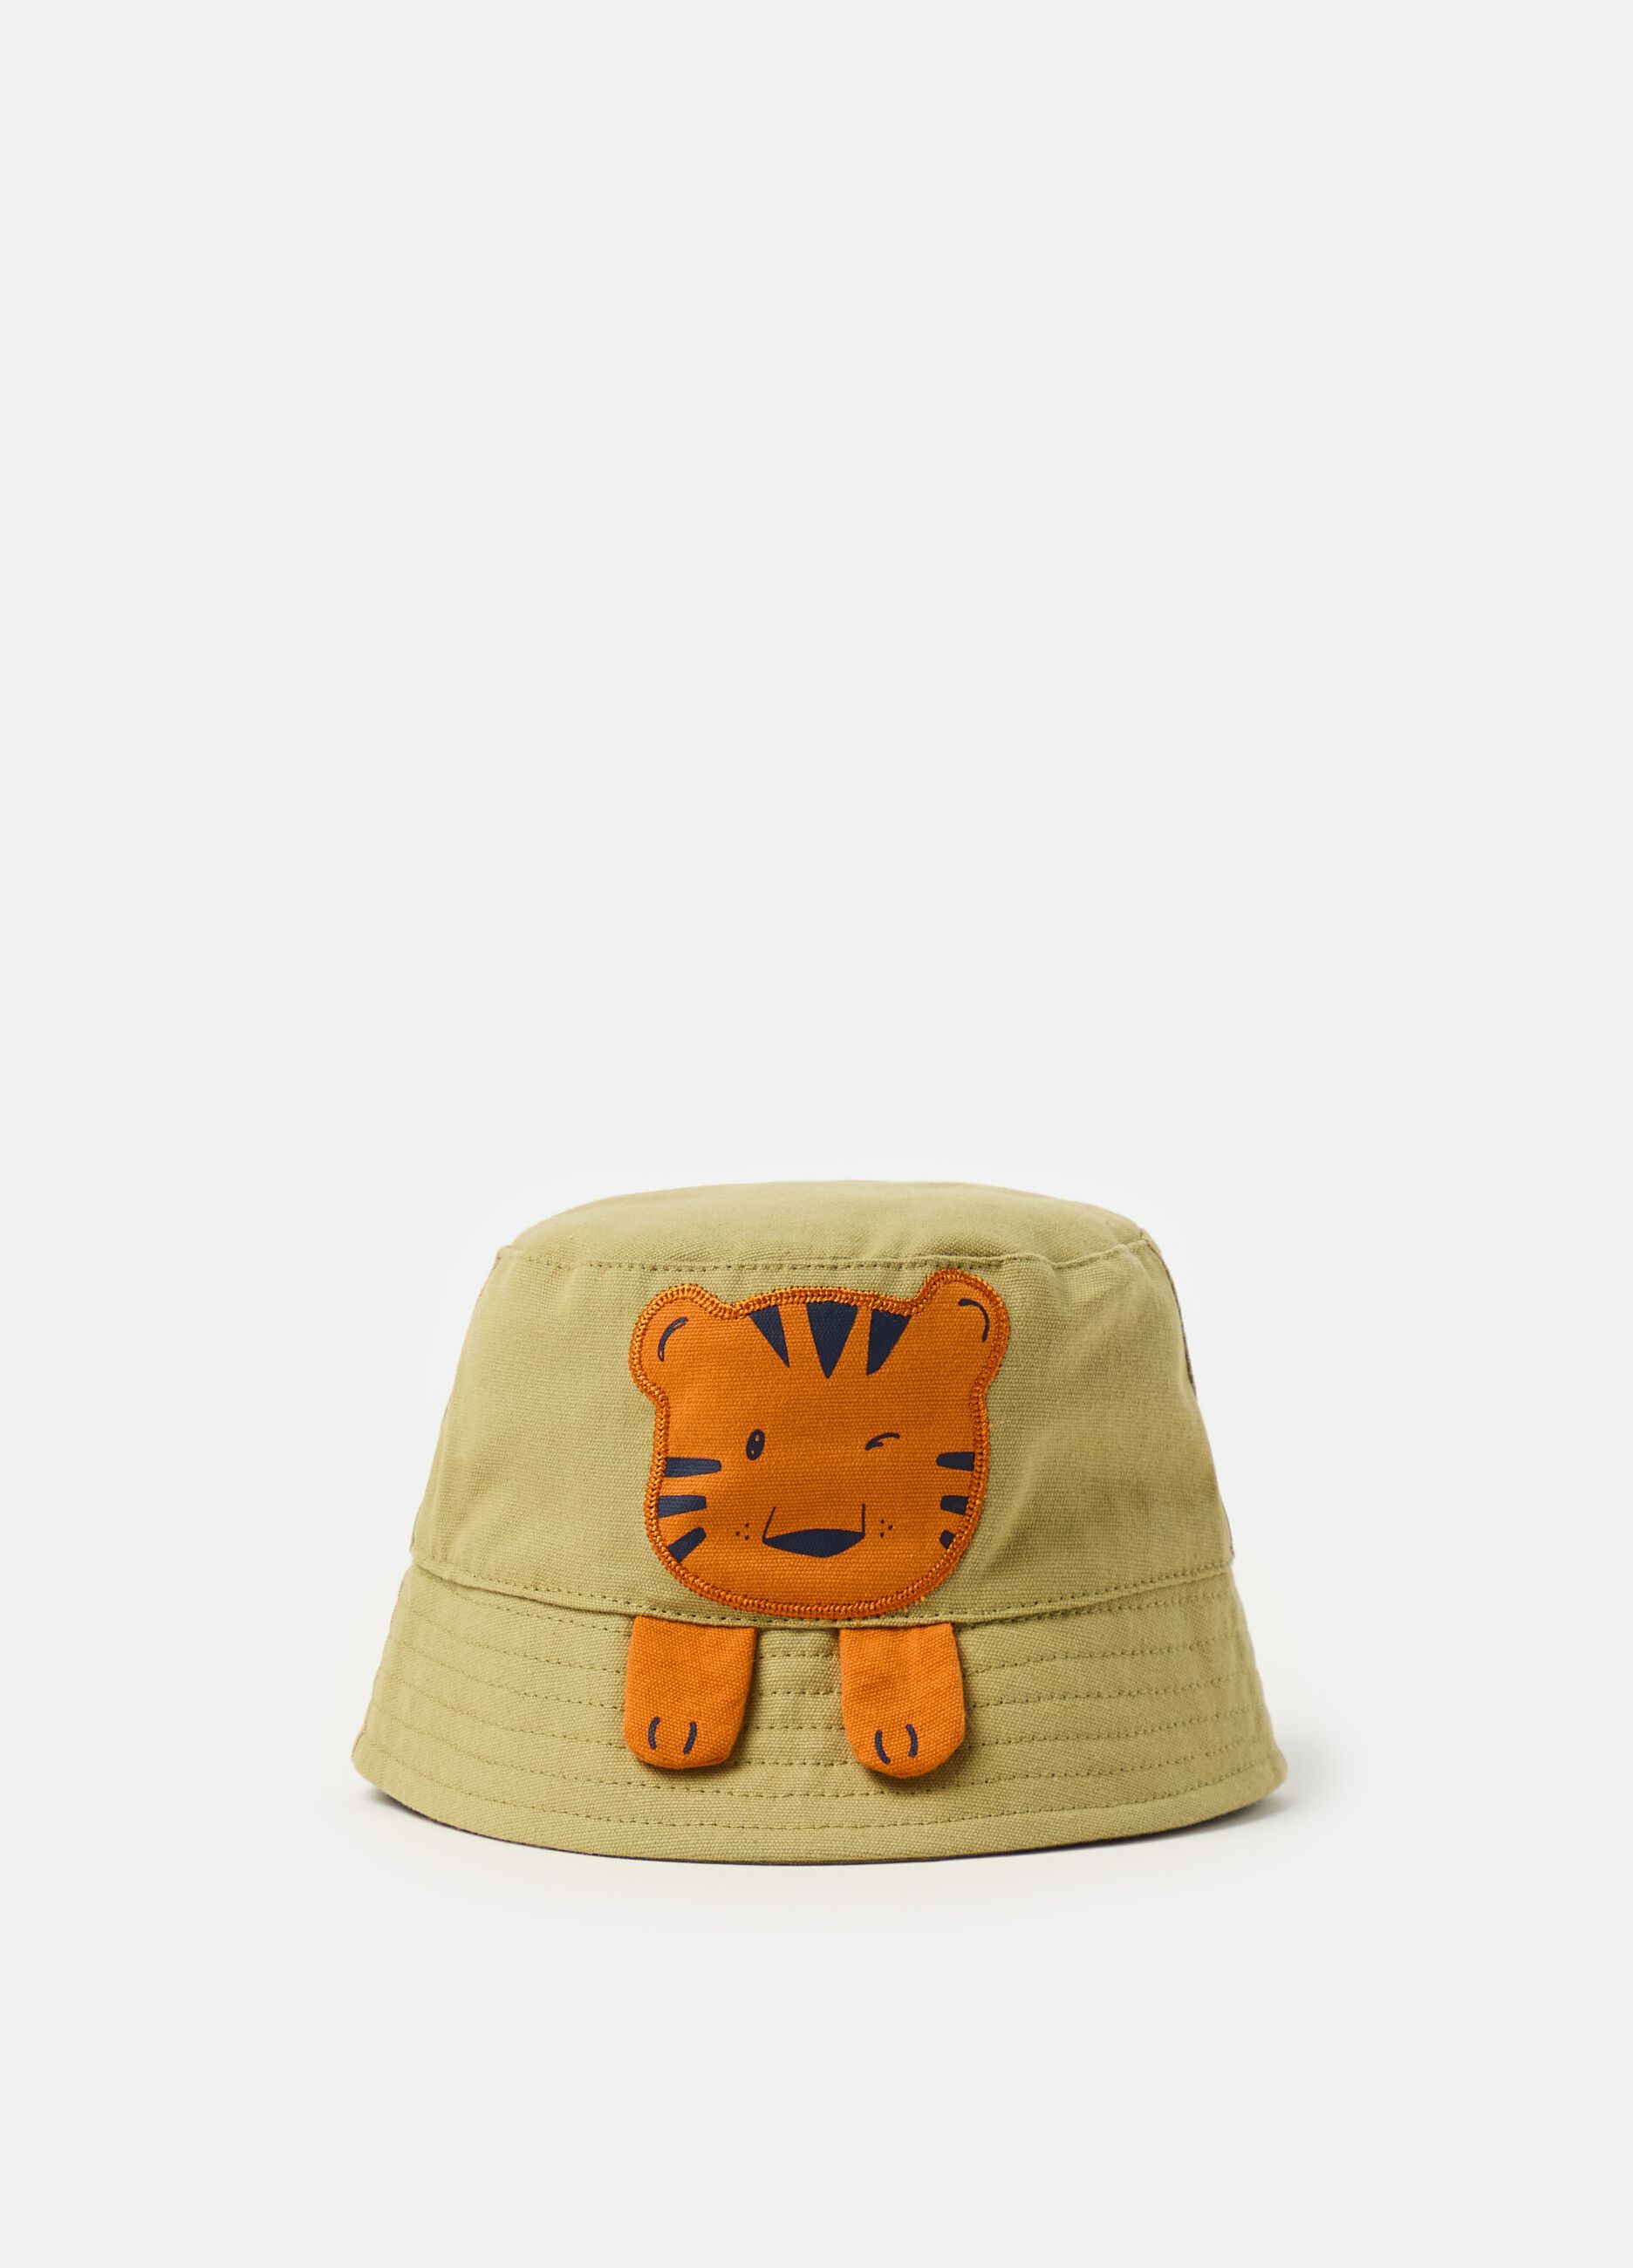 Fishing hat with tiger